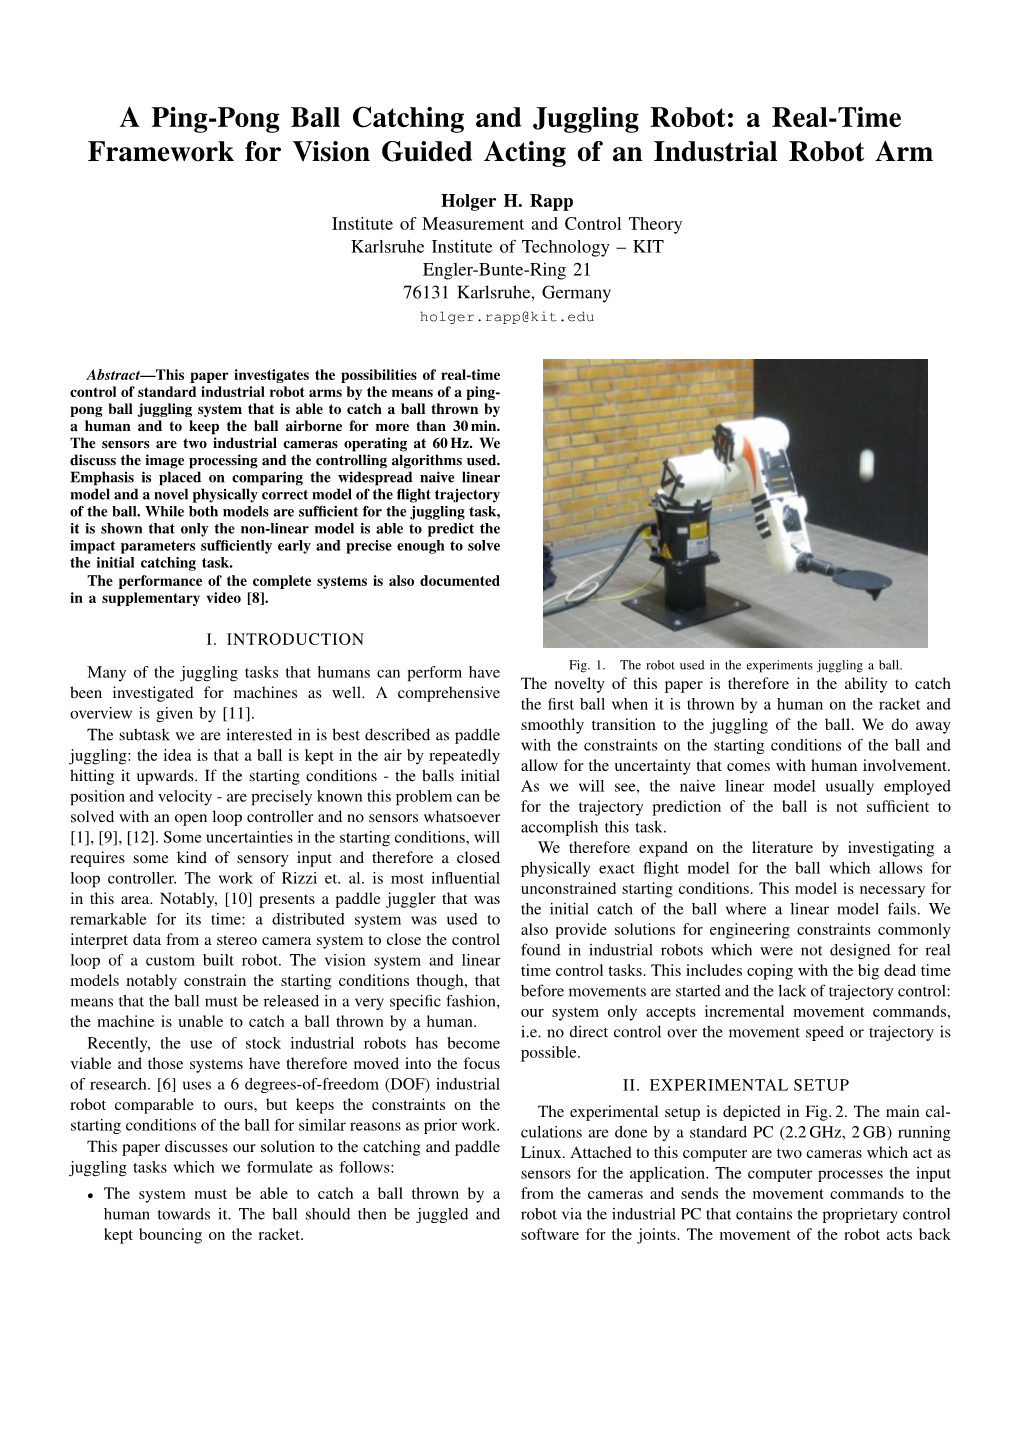 A Ping-Pong Ball Catching and Juggling Robot: a Real-Time Framework for Vision Guided Acting of an Industrial Robot Arm